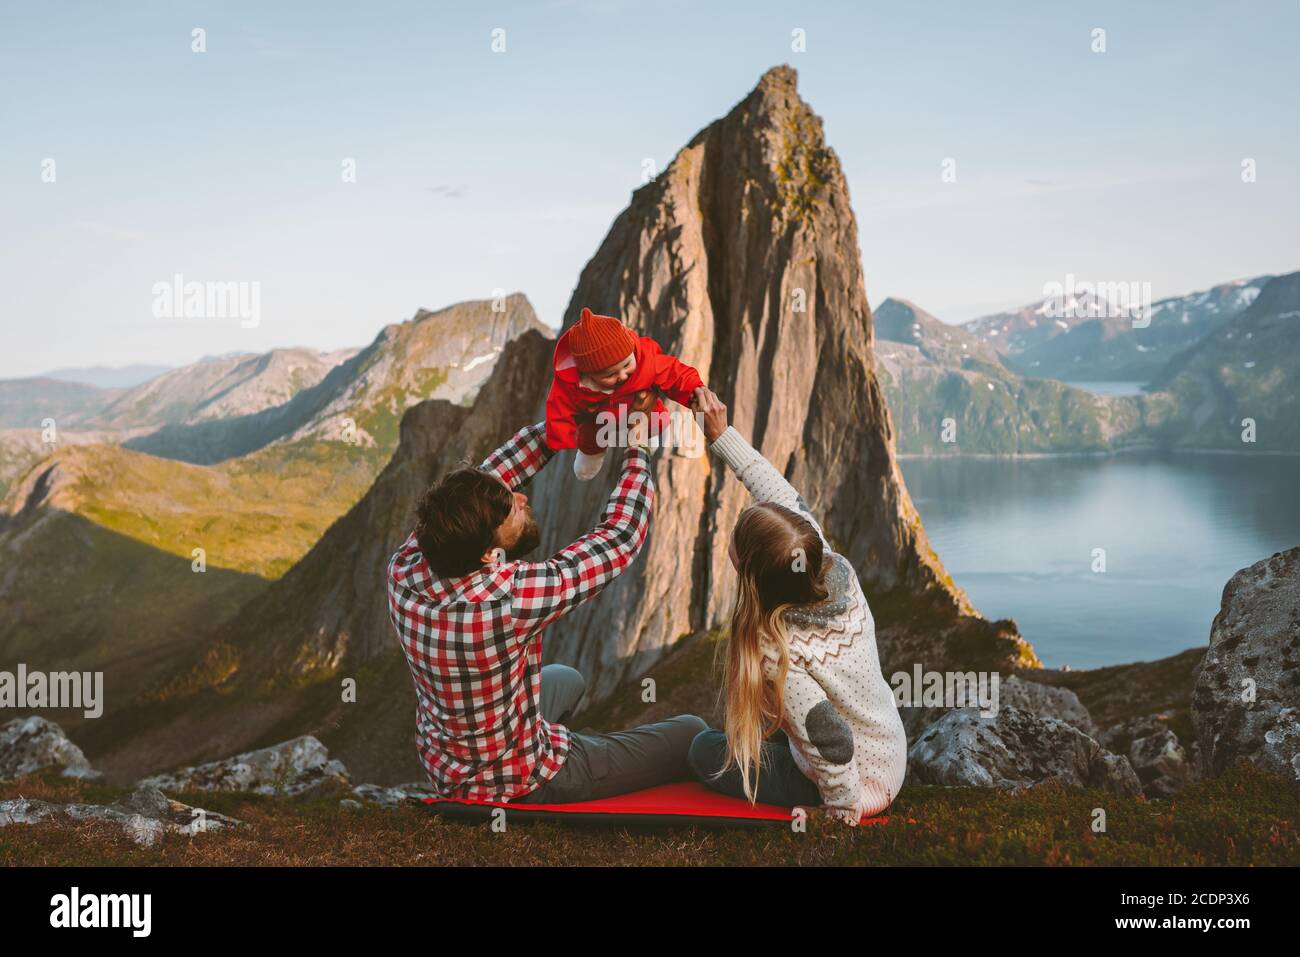 Family parents mother and father with baby playing outdoor active healthy lifestyle camping with Segla mountain view eco tourism in Norway man and wom Stock Photo